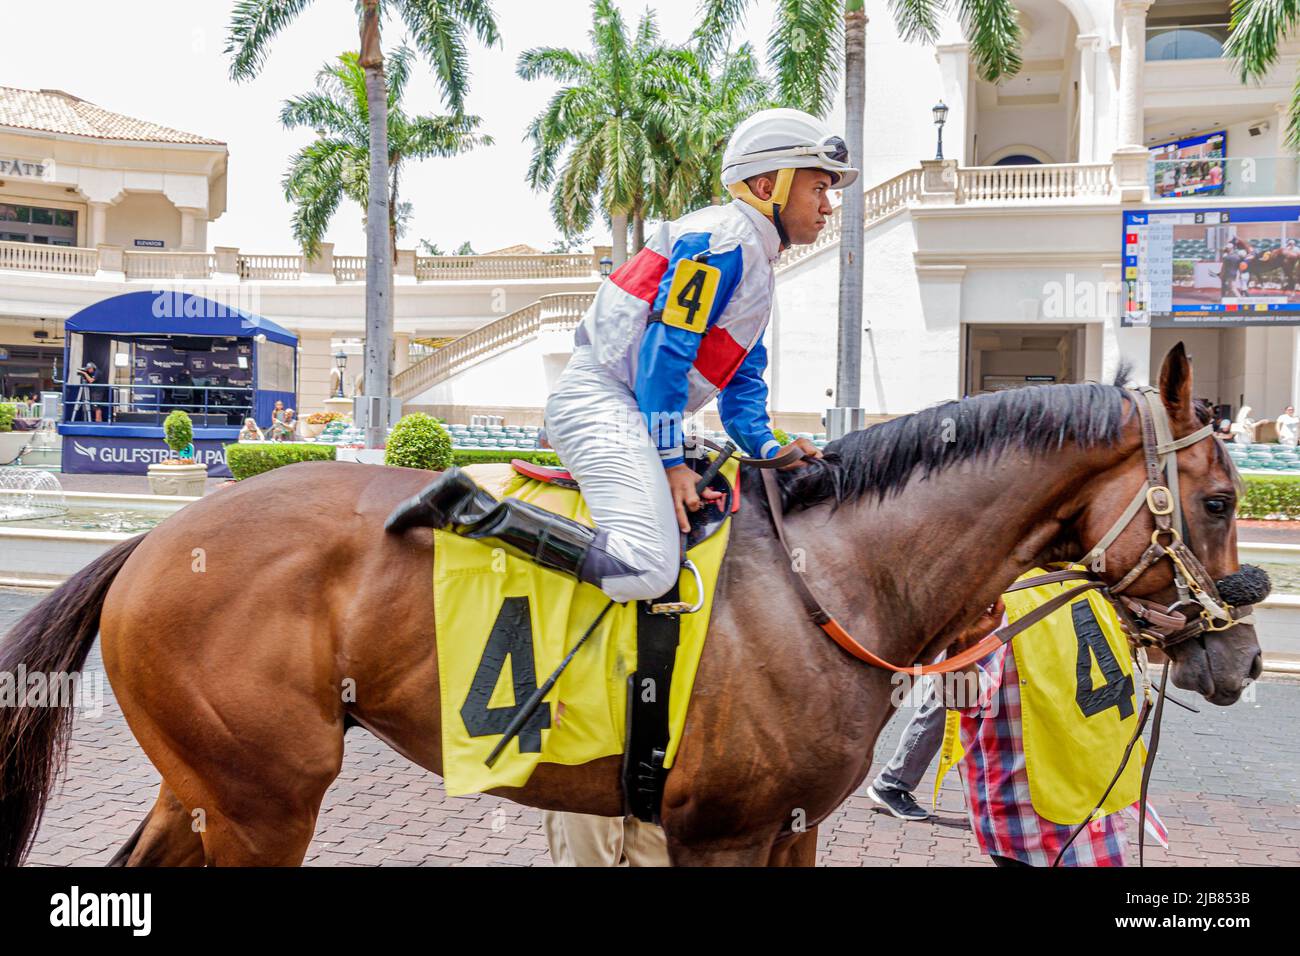 Hallandale Florida Miami,Gulfstream Park racetrack racecourse thoroughbred horse racing track,pre-race warm up paddock walking ring groom stable boy h Stock Photo